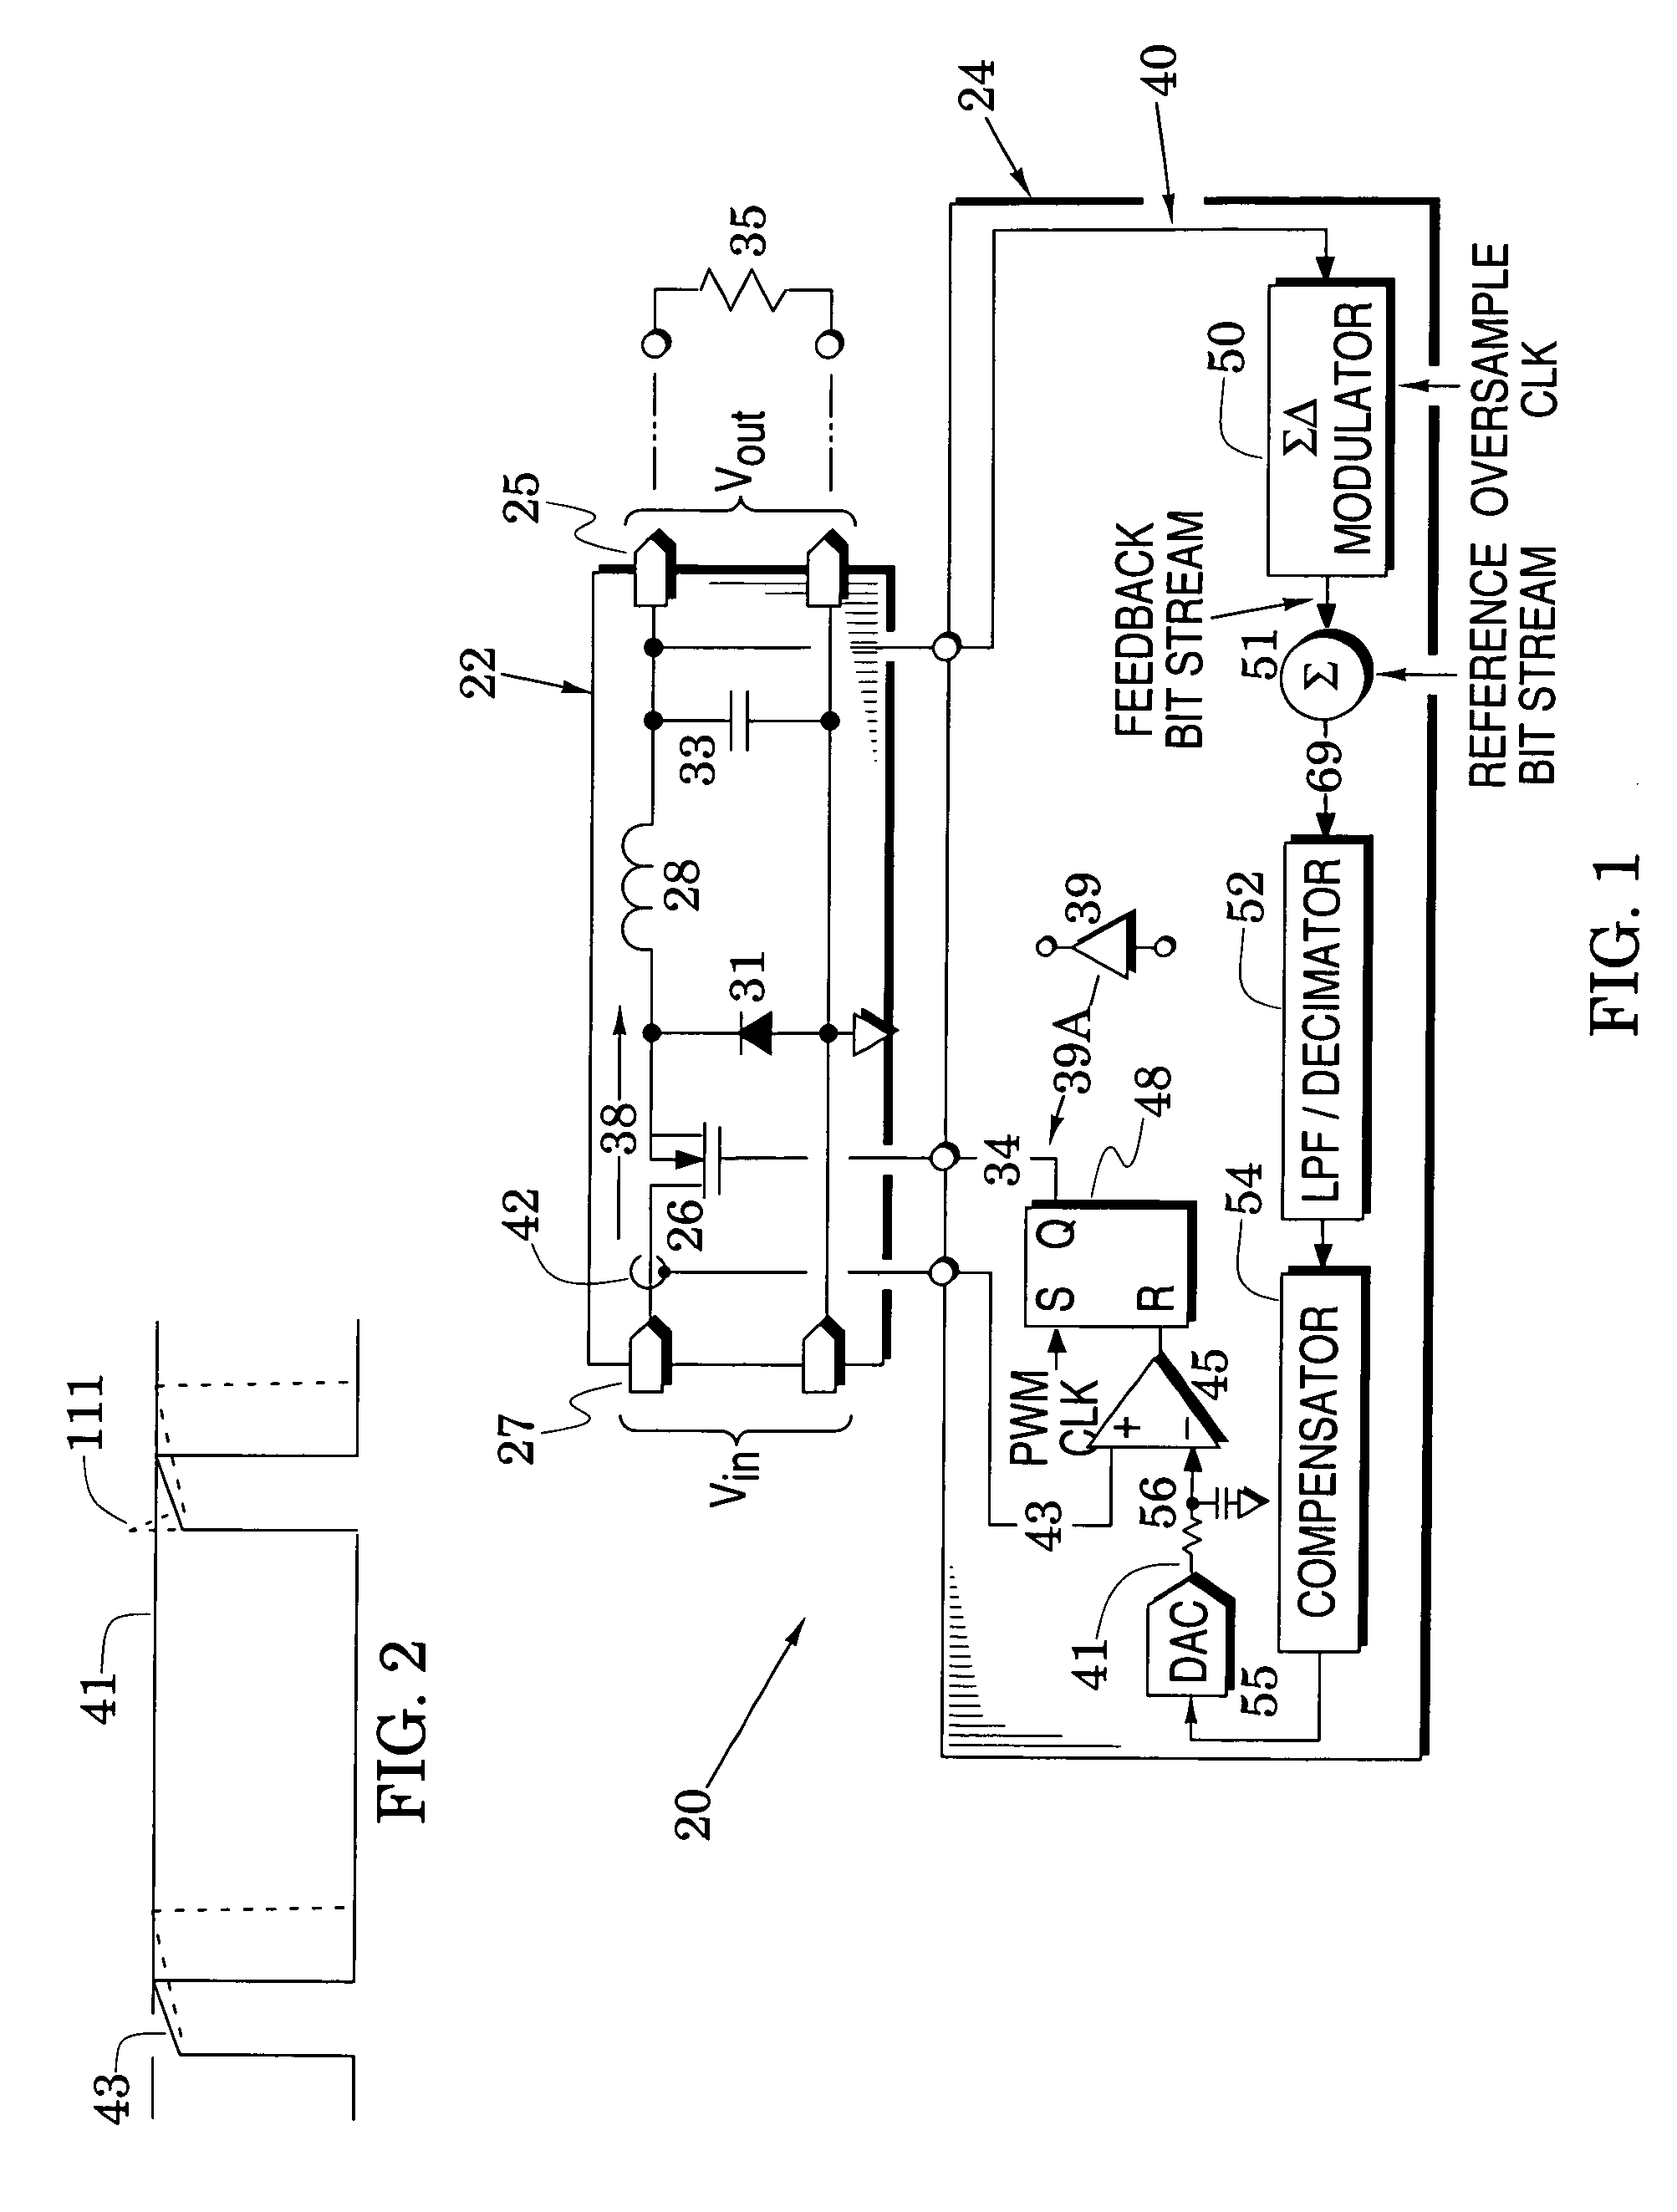 Switching converters controlled via sigma delta modulation